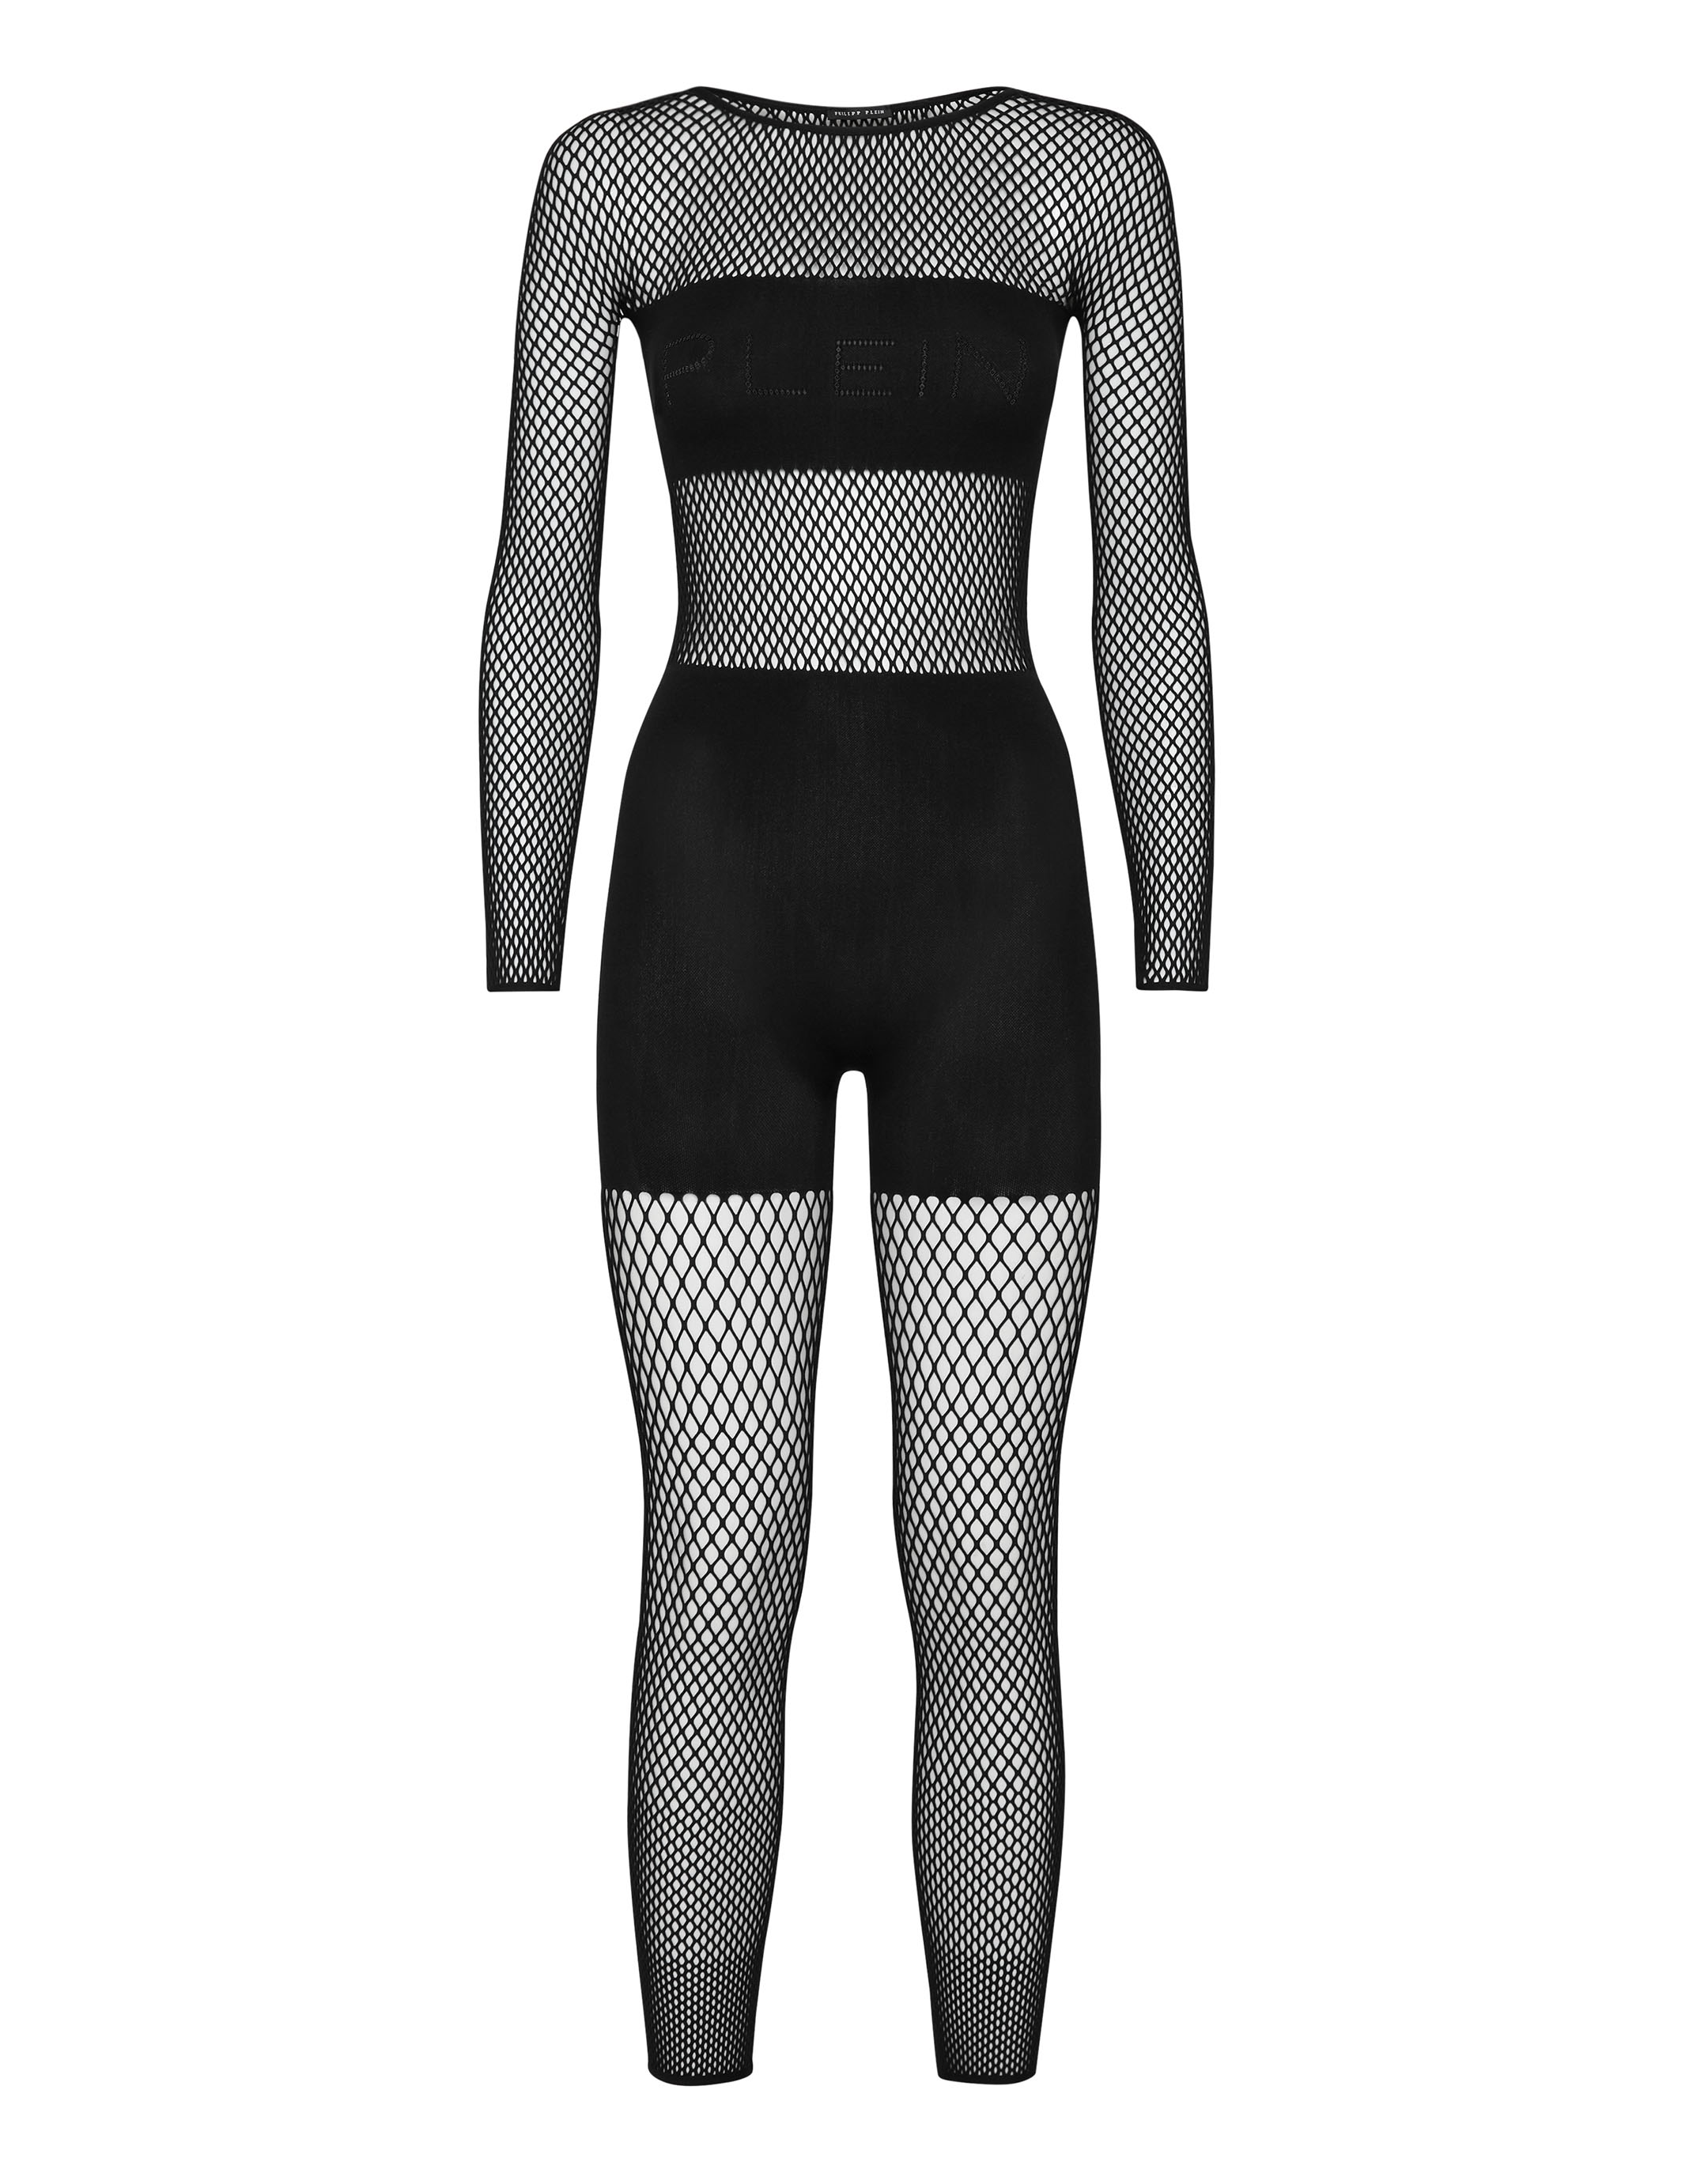 Jumpsuit Long Sleeves Seamless Mesh | Philipp Plein Outlet